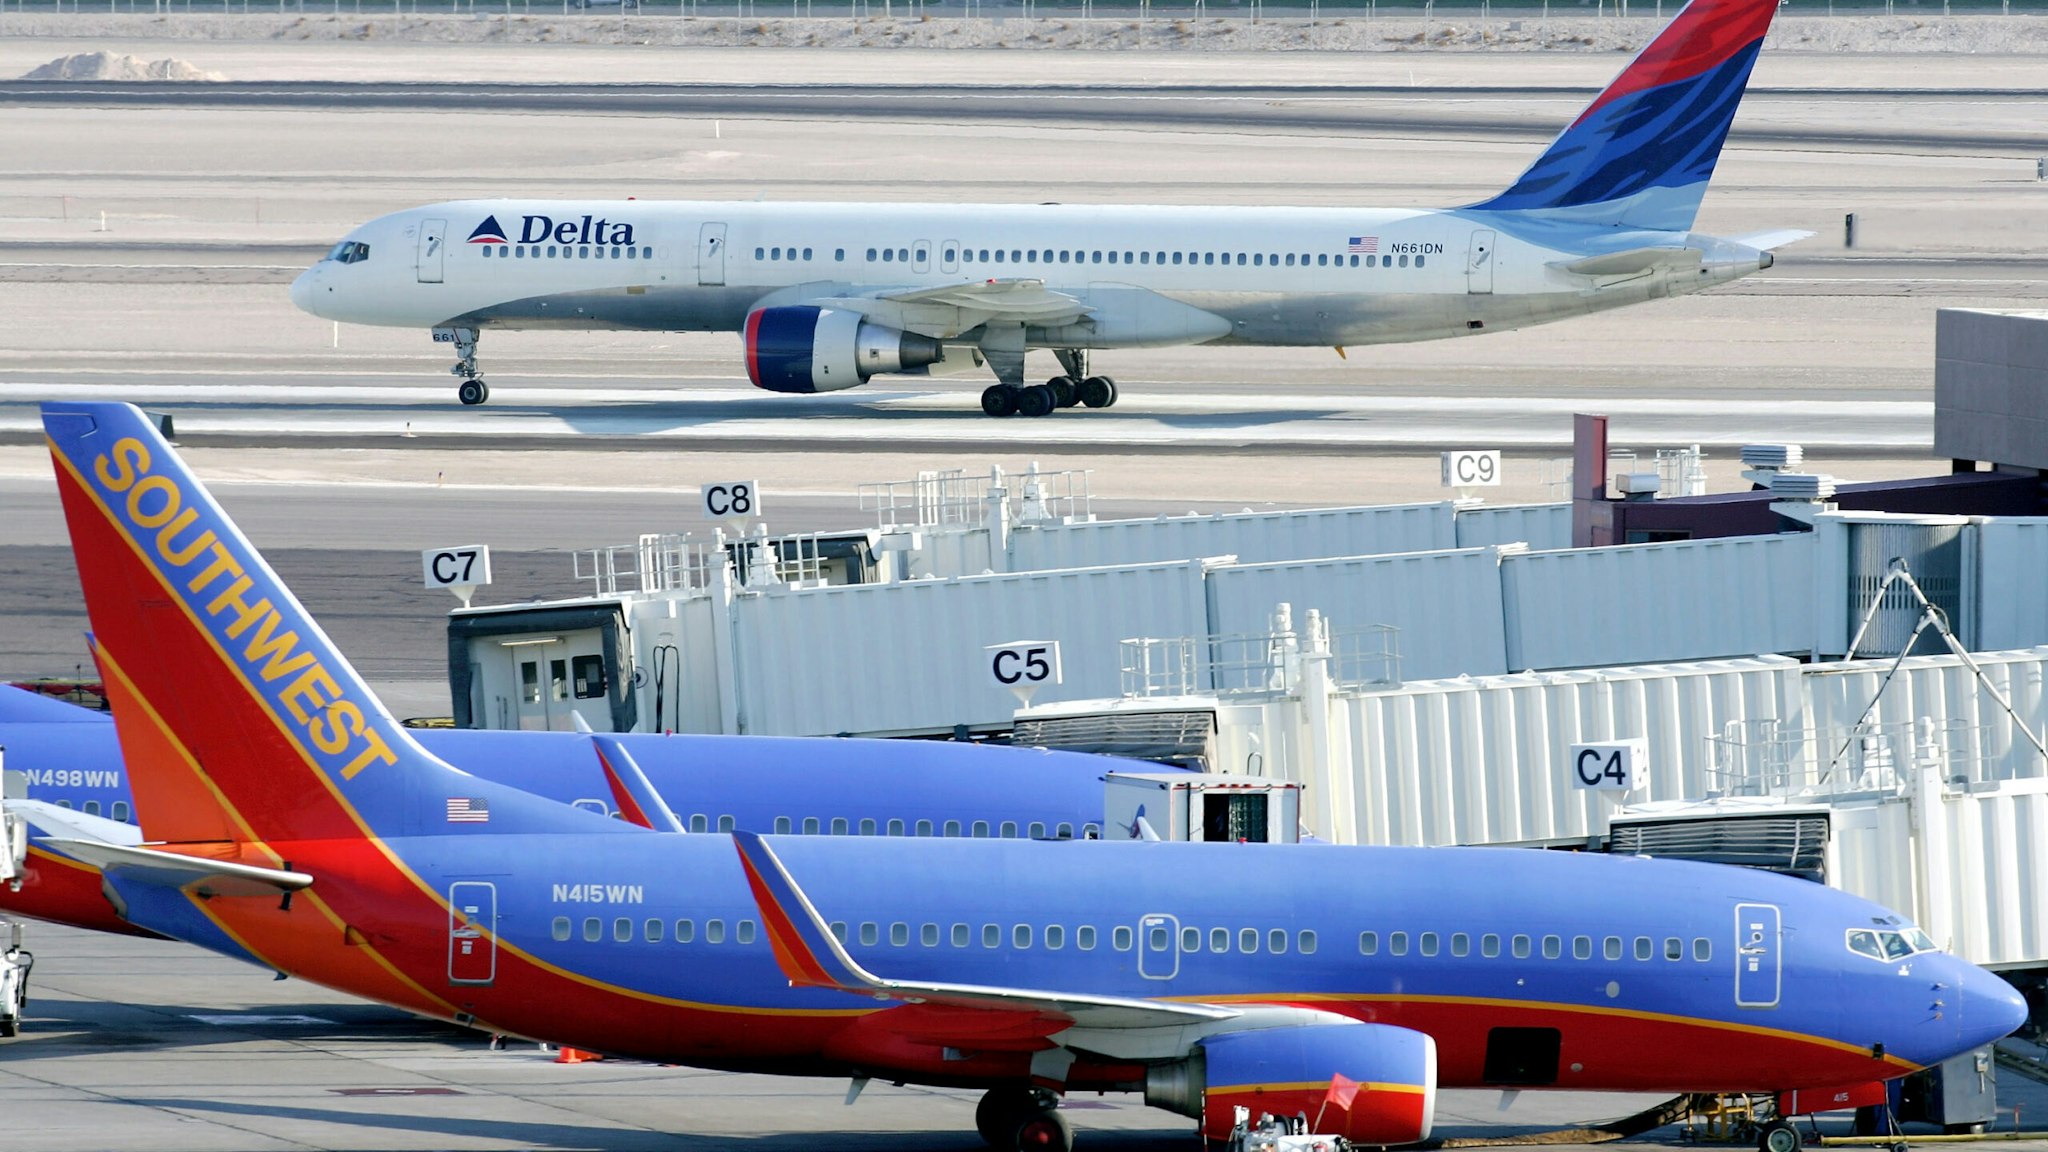 LAS VEGAS - SEPTEMBER 12: A Delta Air Lines jet taxis beyond parked Southwest Airlines planes at McCarran International Airport September 12, 2005 in Las Vegas, Nevada. Delta's stock plunged more than 22% to an all-time low today amid reports that it might file for bankruptcy protection as early as this week.